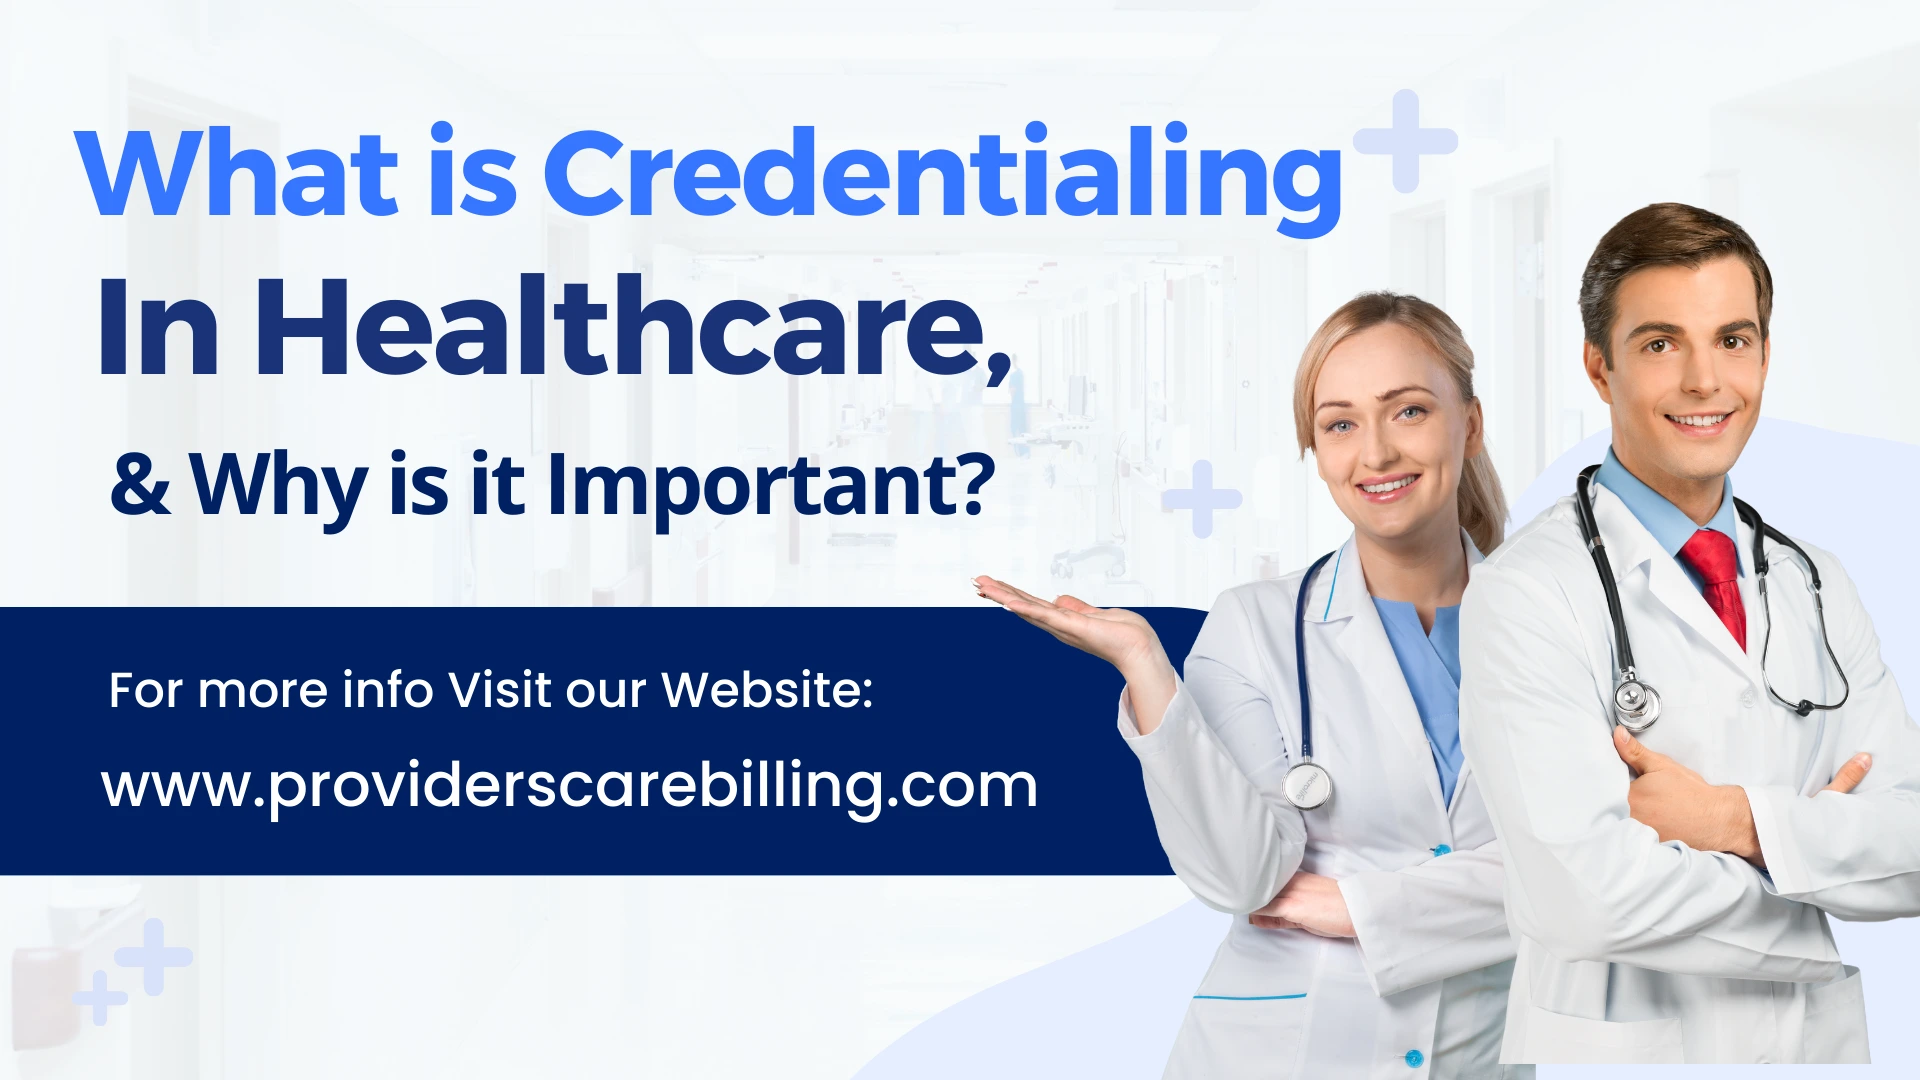 What is Credentialing in Healthcare, and Why is it Important?